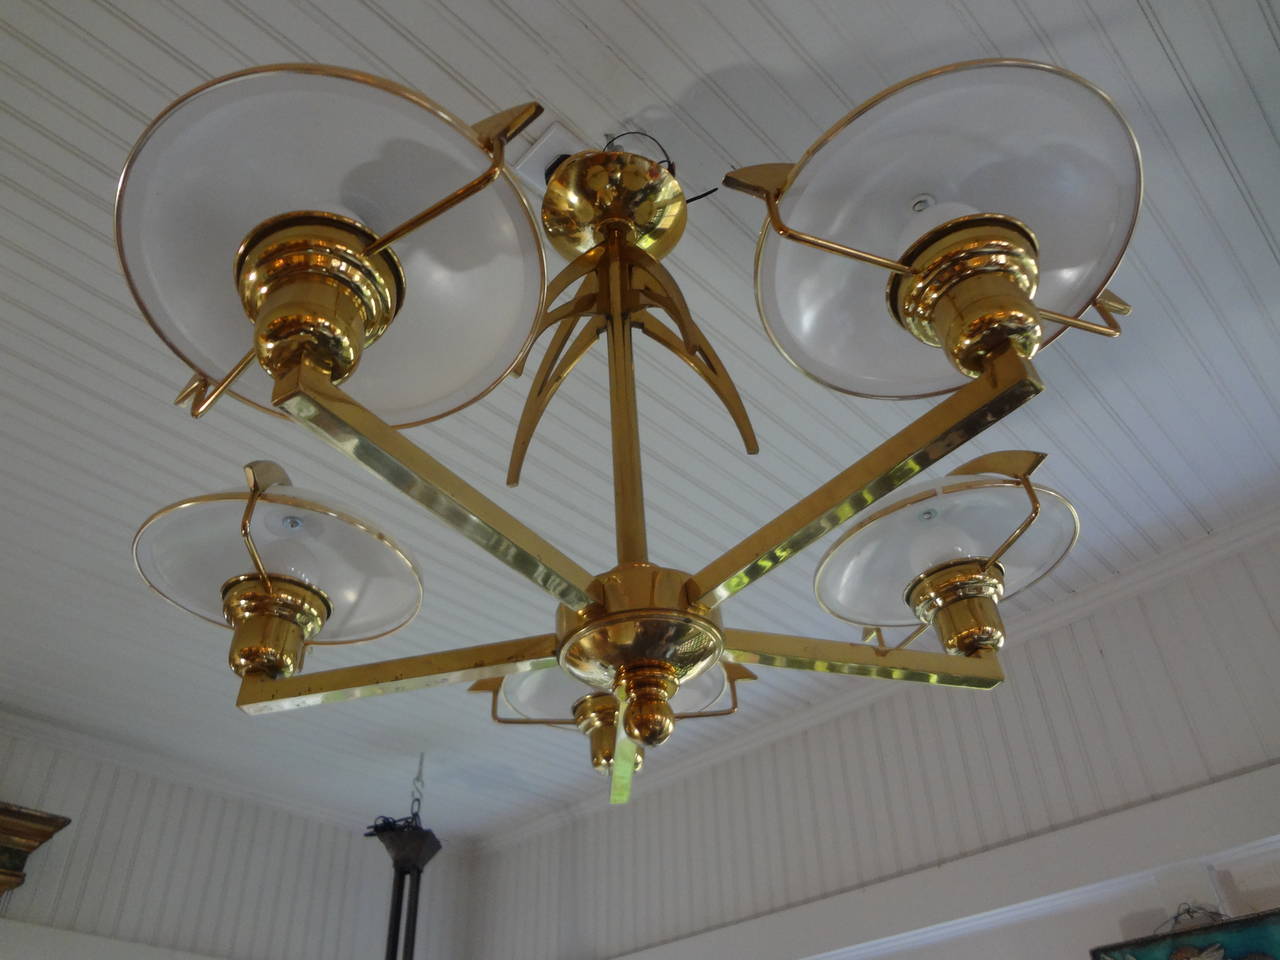 Late 20th Century Italian Mid-Century Modern Brass and Glass Chandelier, Stilnovo Style For Sale